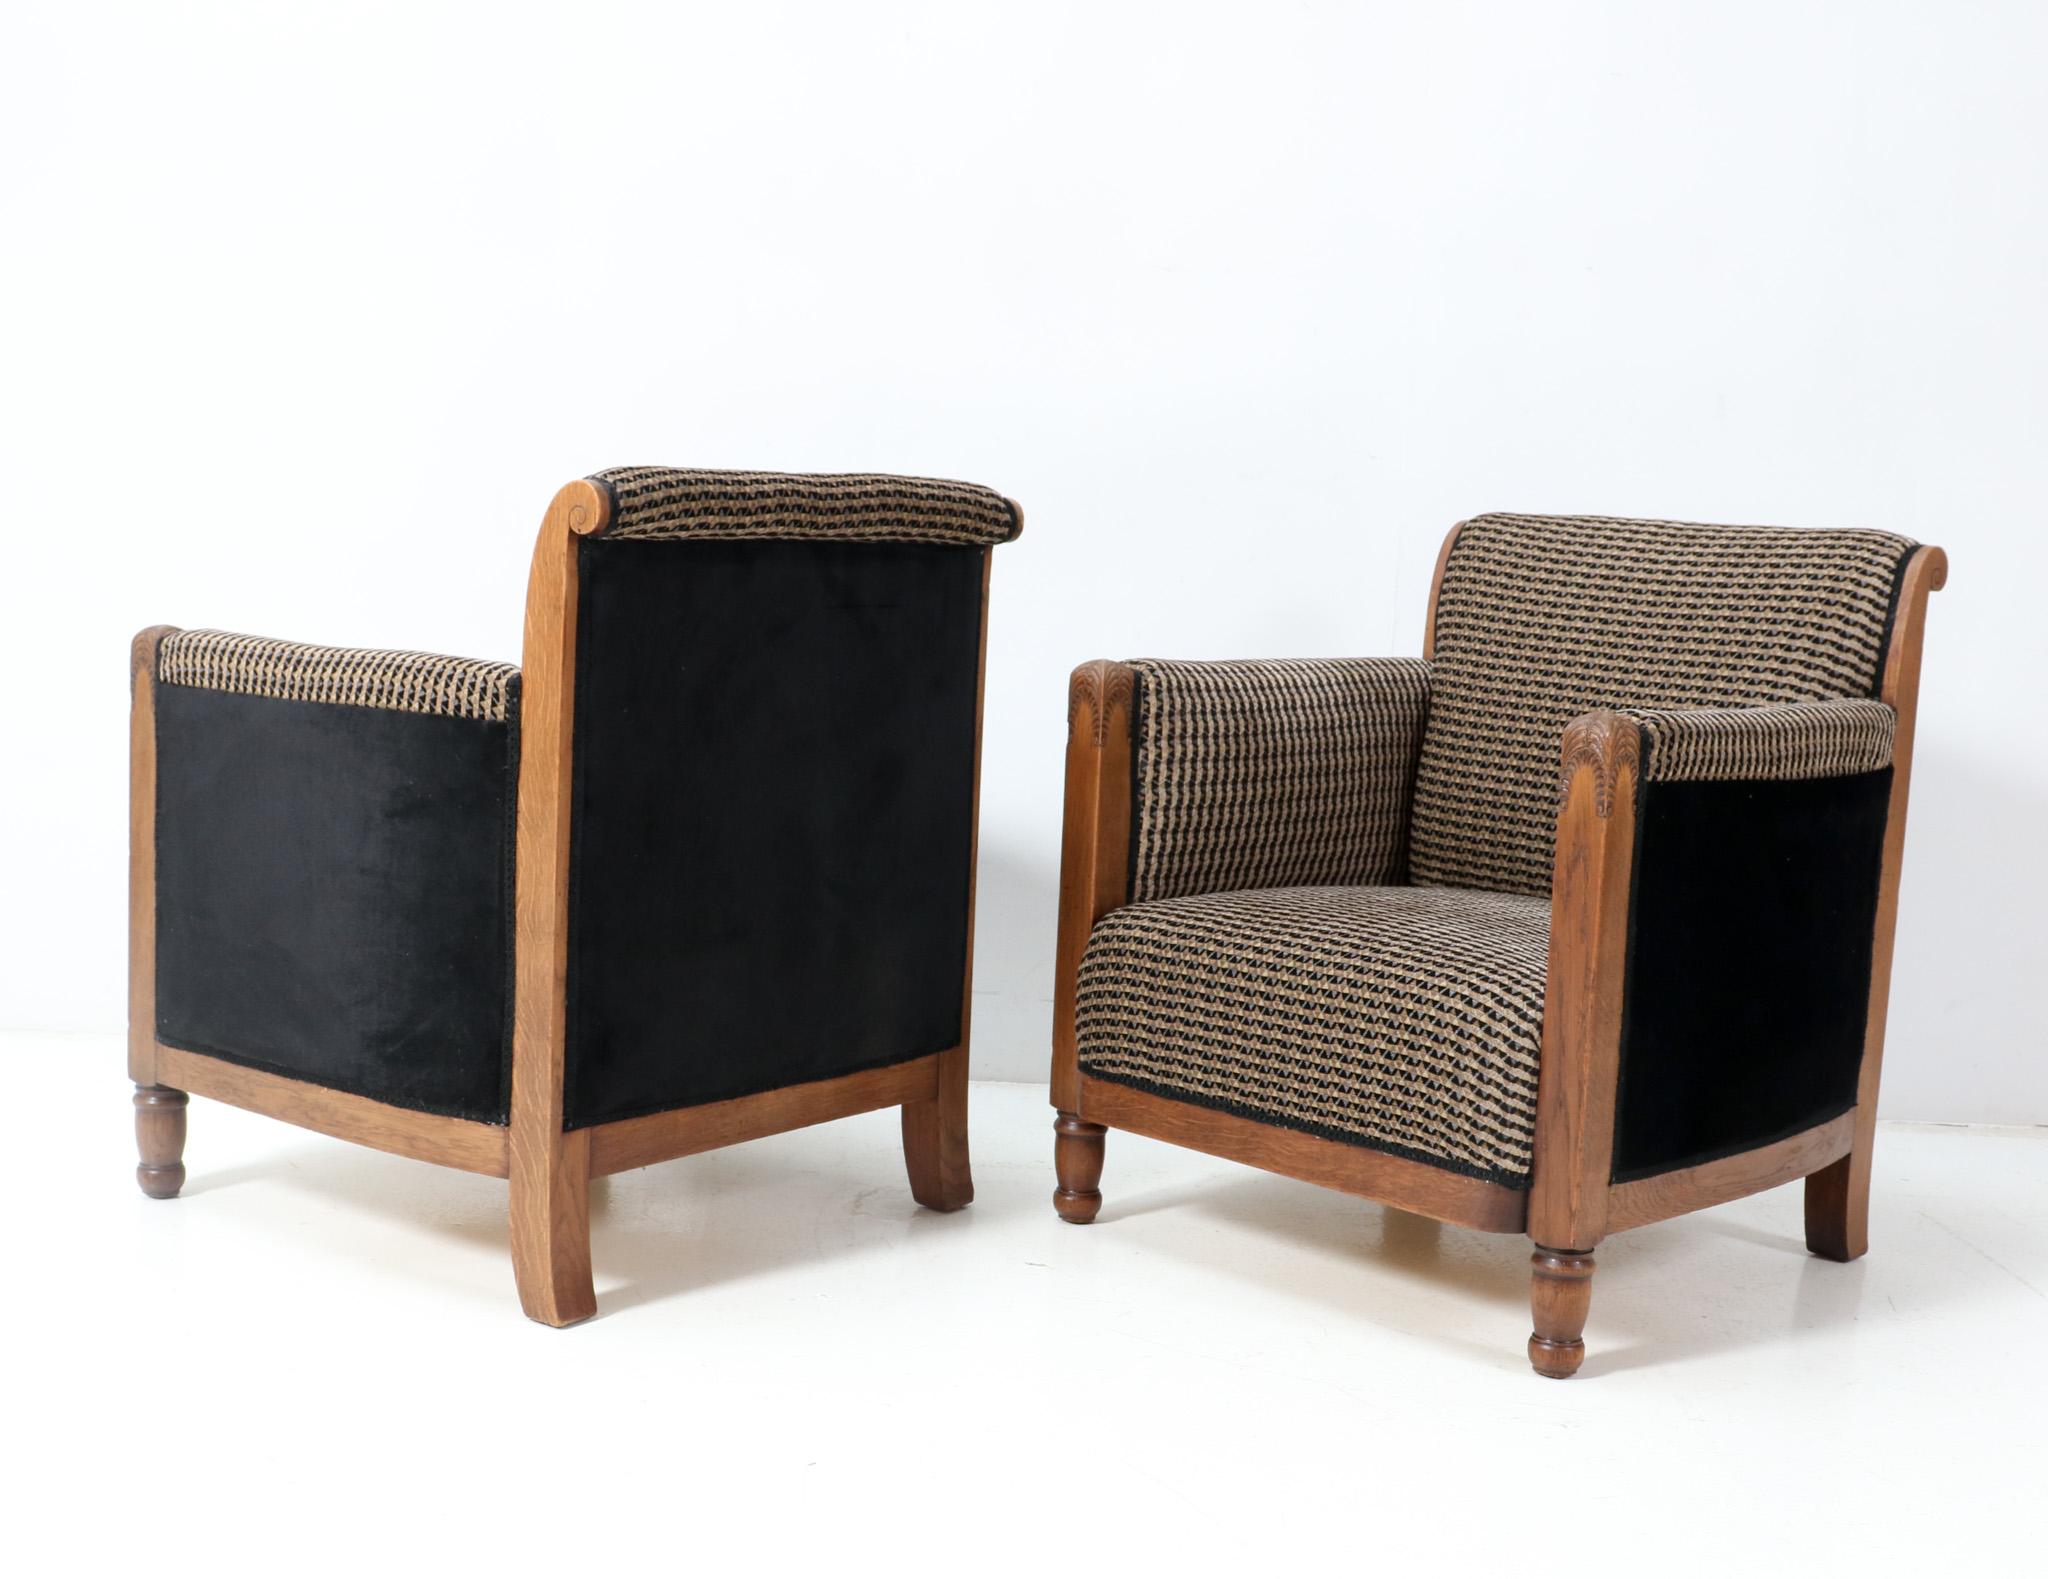 Early 20th Century Two Oak Art Deco Amsterdamse School Lounge Chairs by Chris Bartels, 1920s